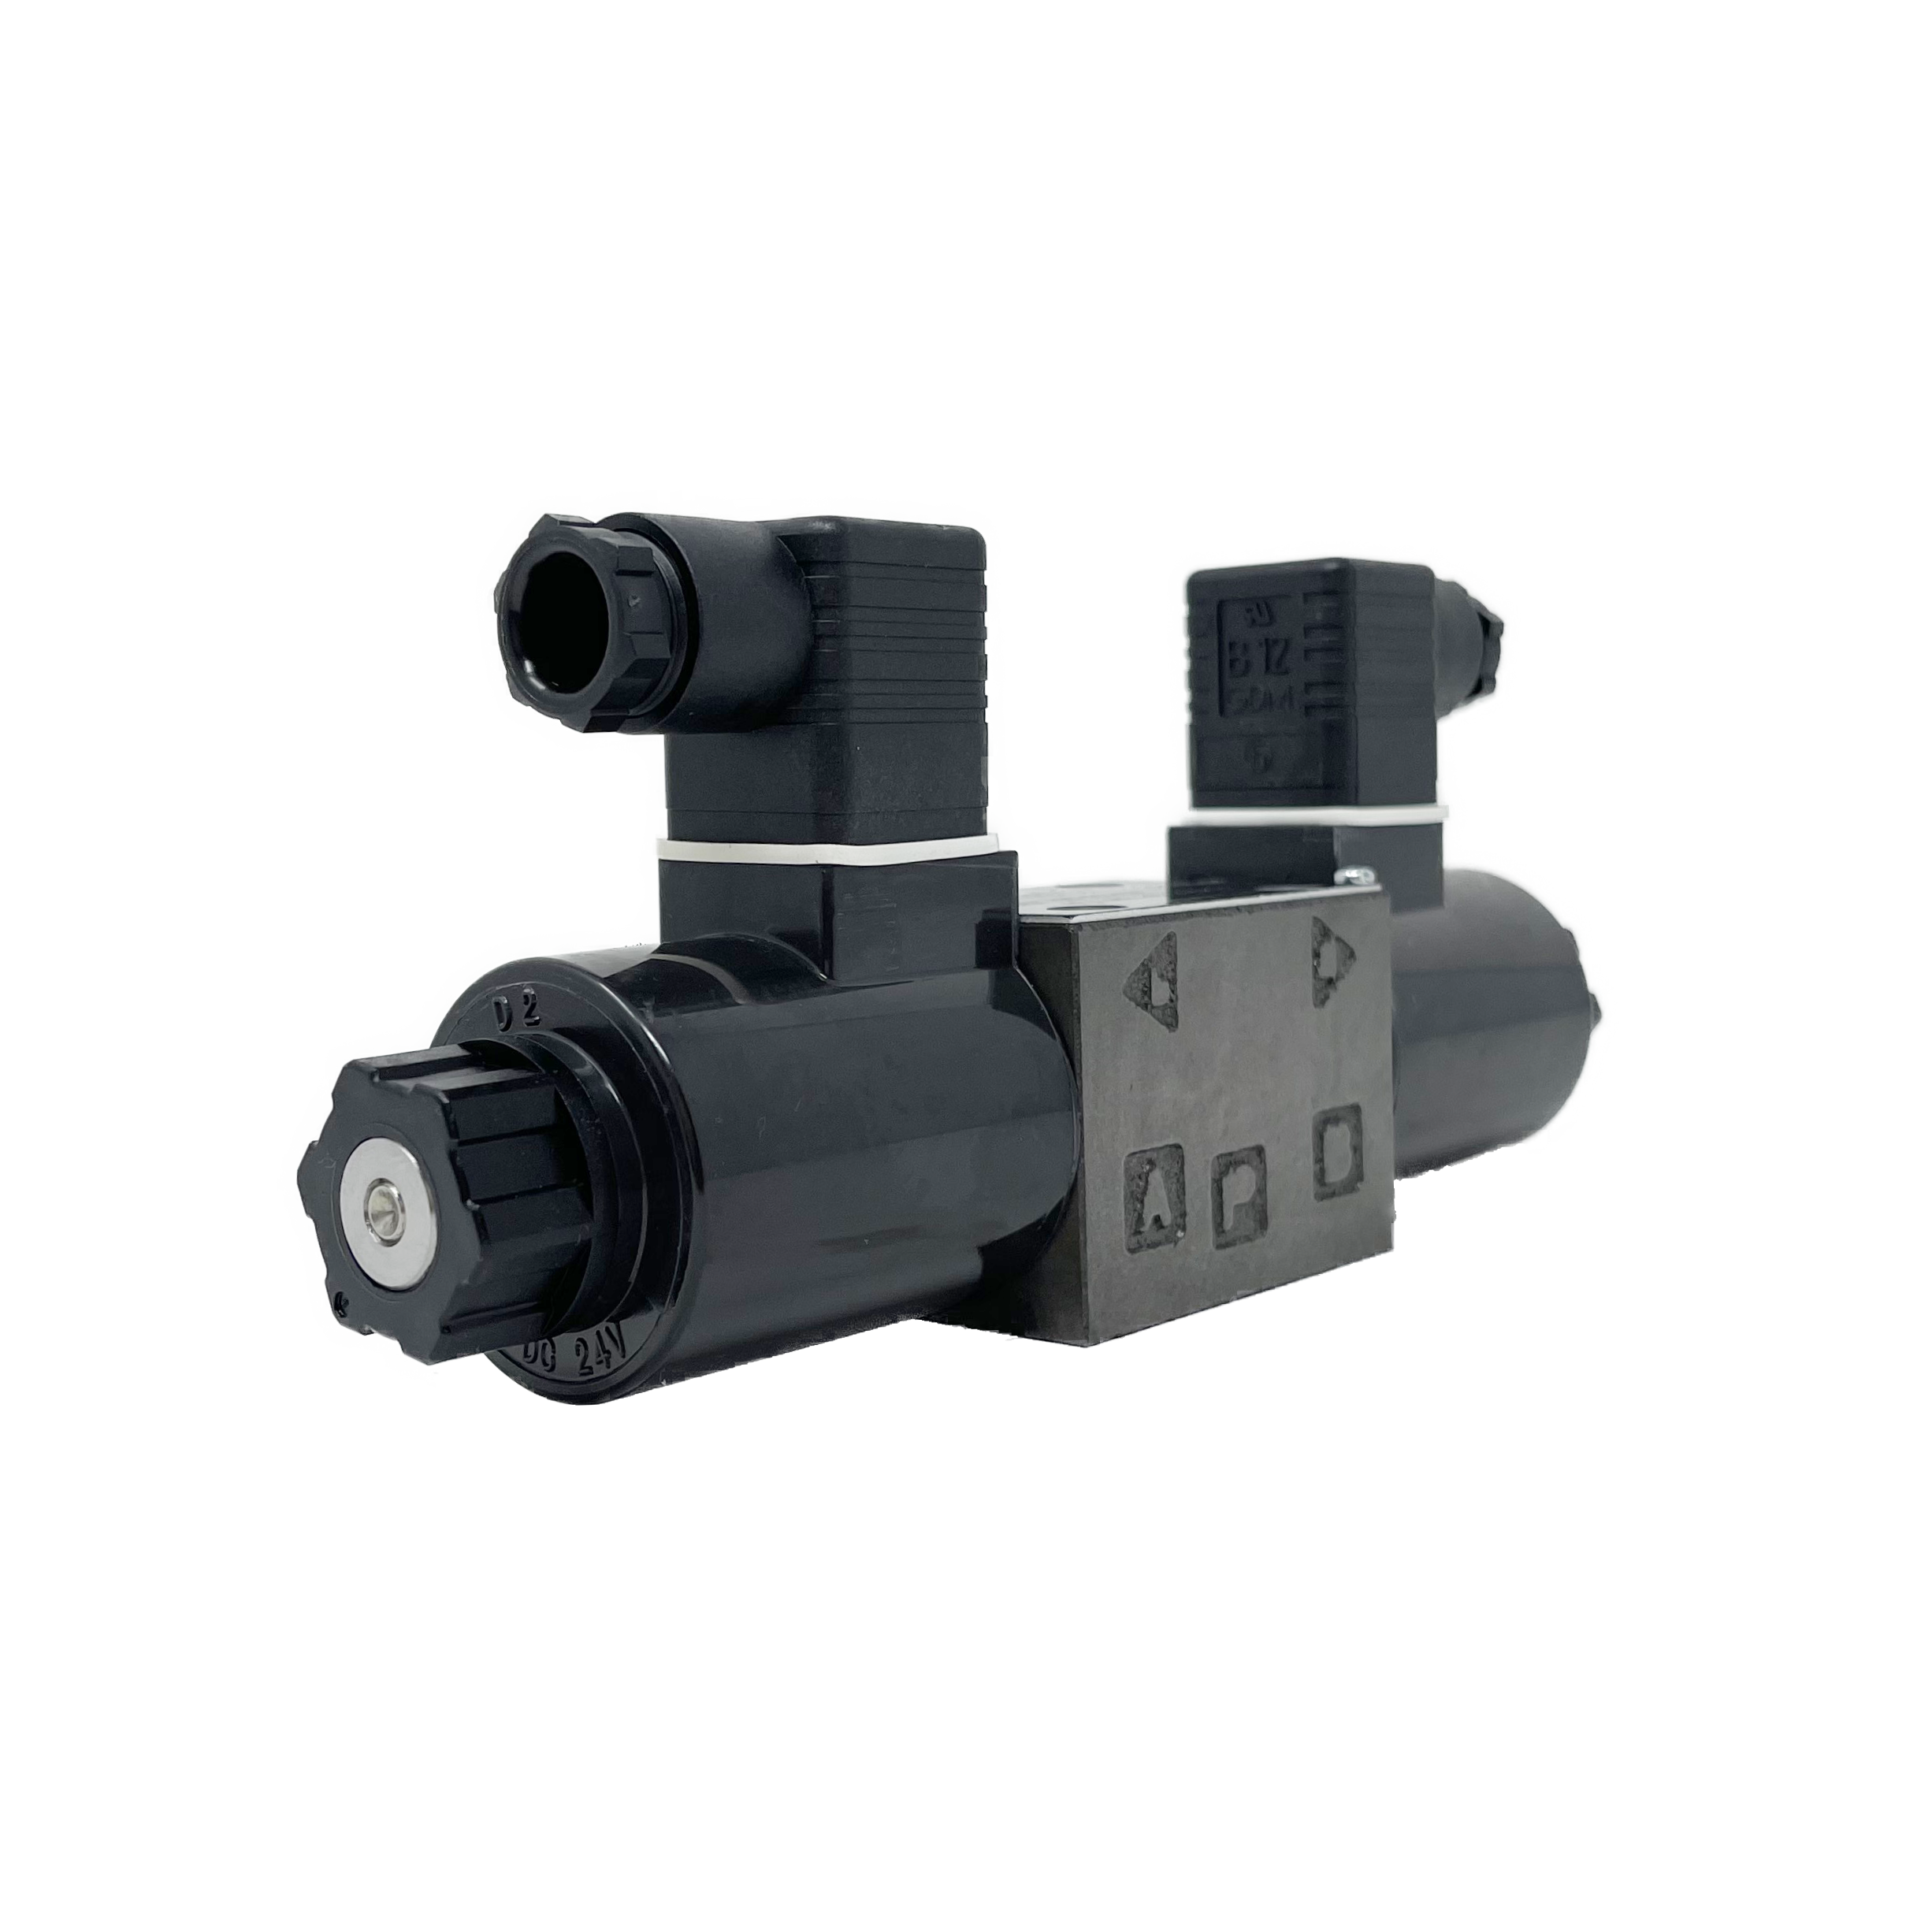 SA-G01-C6-E115-E31 : Nachi Solenoid Valve, 3P4W, D03 (NG6), D03 (NG6), 26.4GPM, 5075psi, P Blocked, A&B to T in Neutral, 120 VAC, DIN, Spring Centered